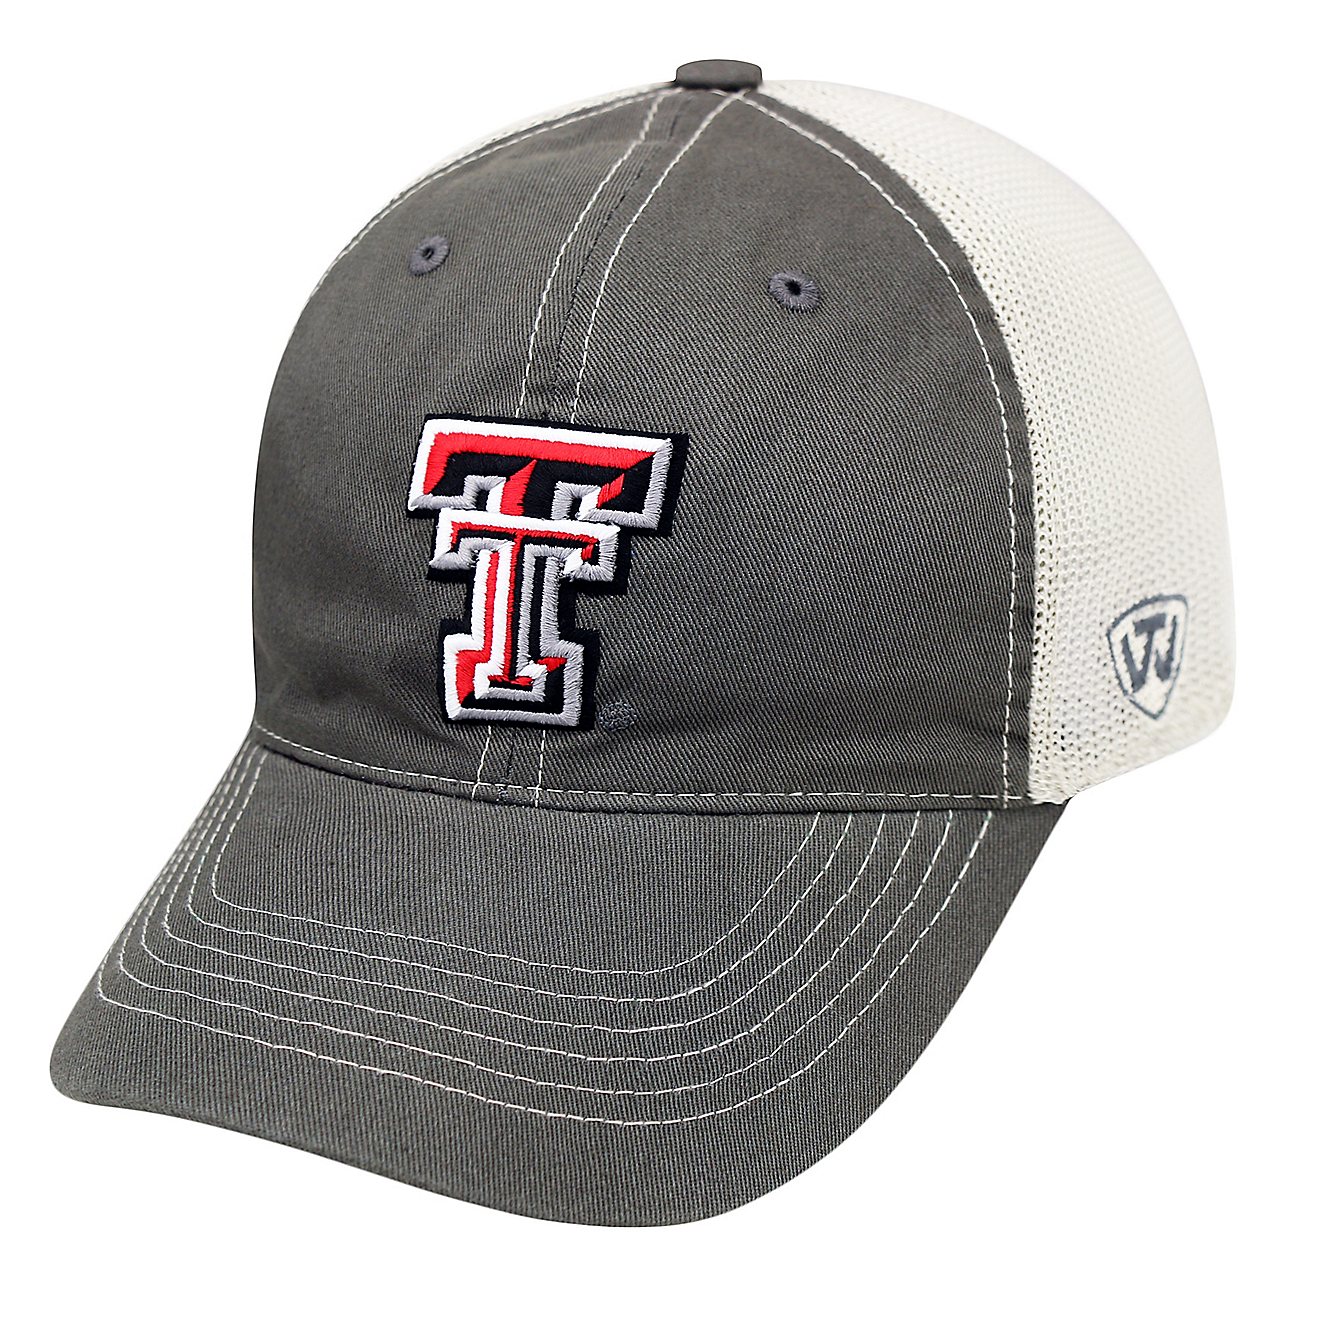 Top of the World Adults' Texas Tech University Putty Cap                                                                         - view number 1